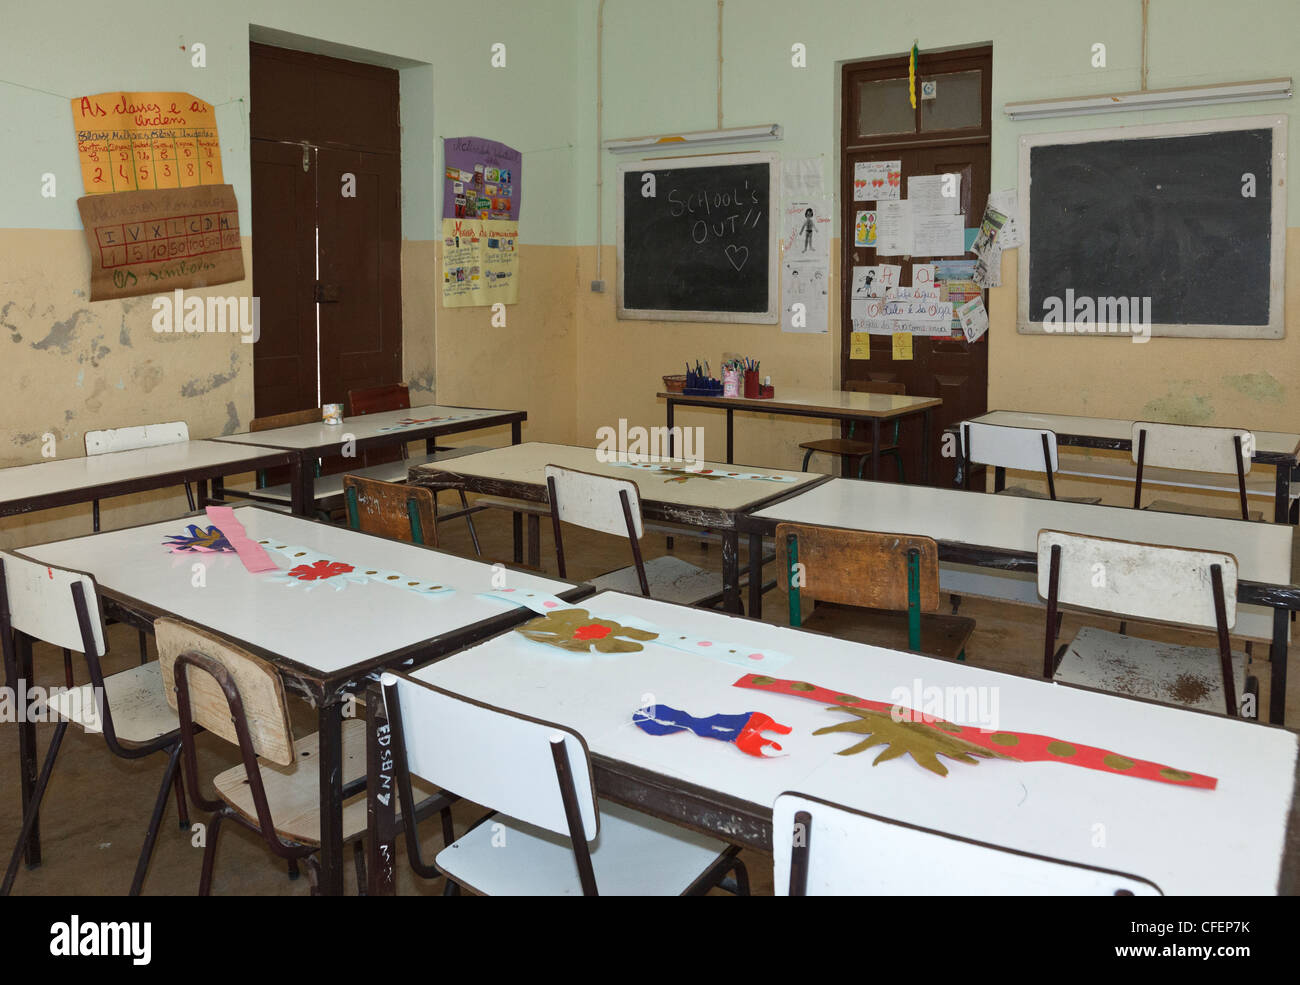 Empty desks and blackboards inside the sparsely furnished primary school classroom in Sal Rei, Boa Vista, Cape Verde Islands. Stock Photo